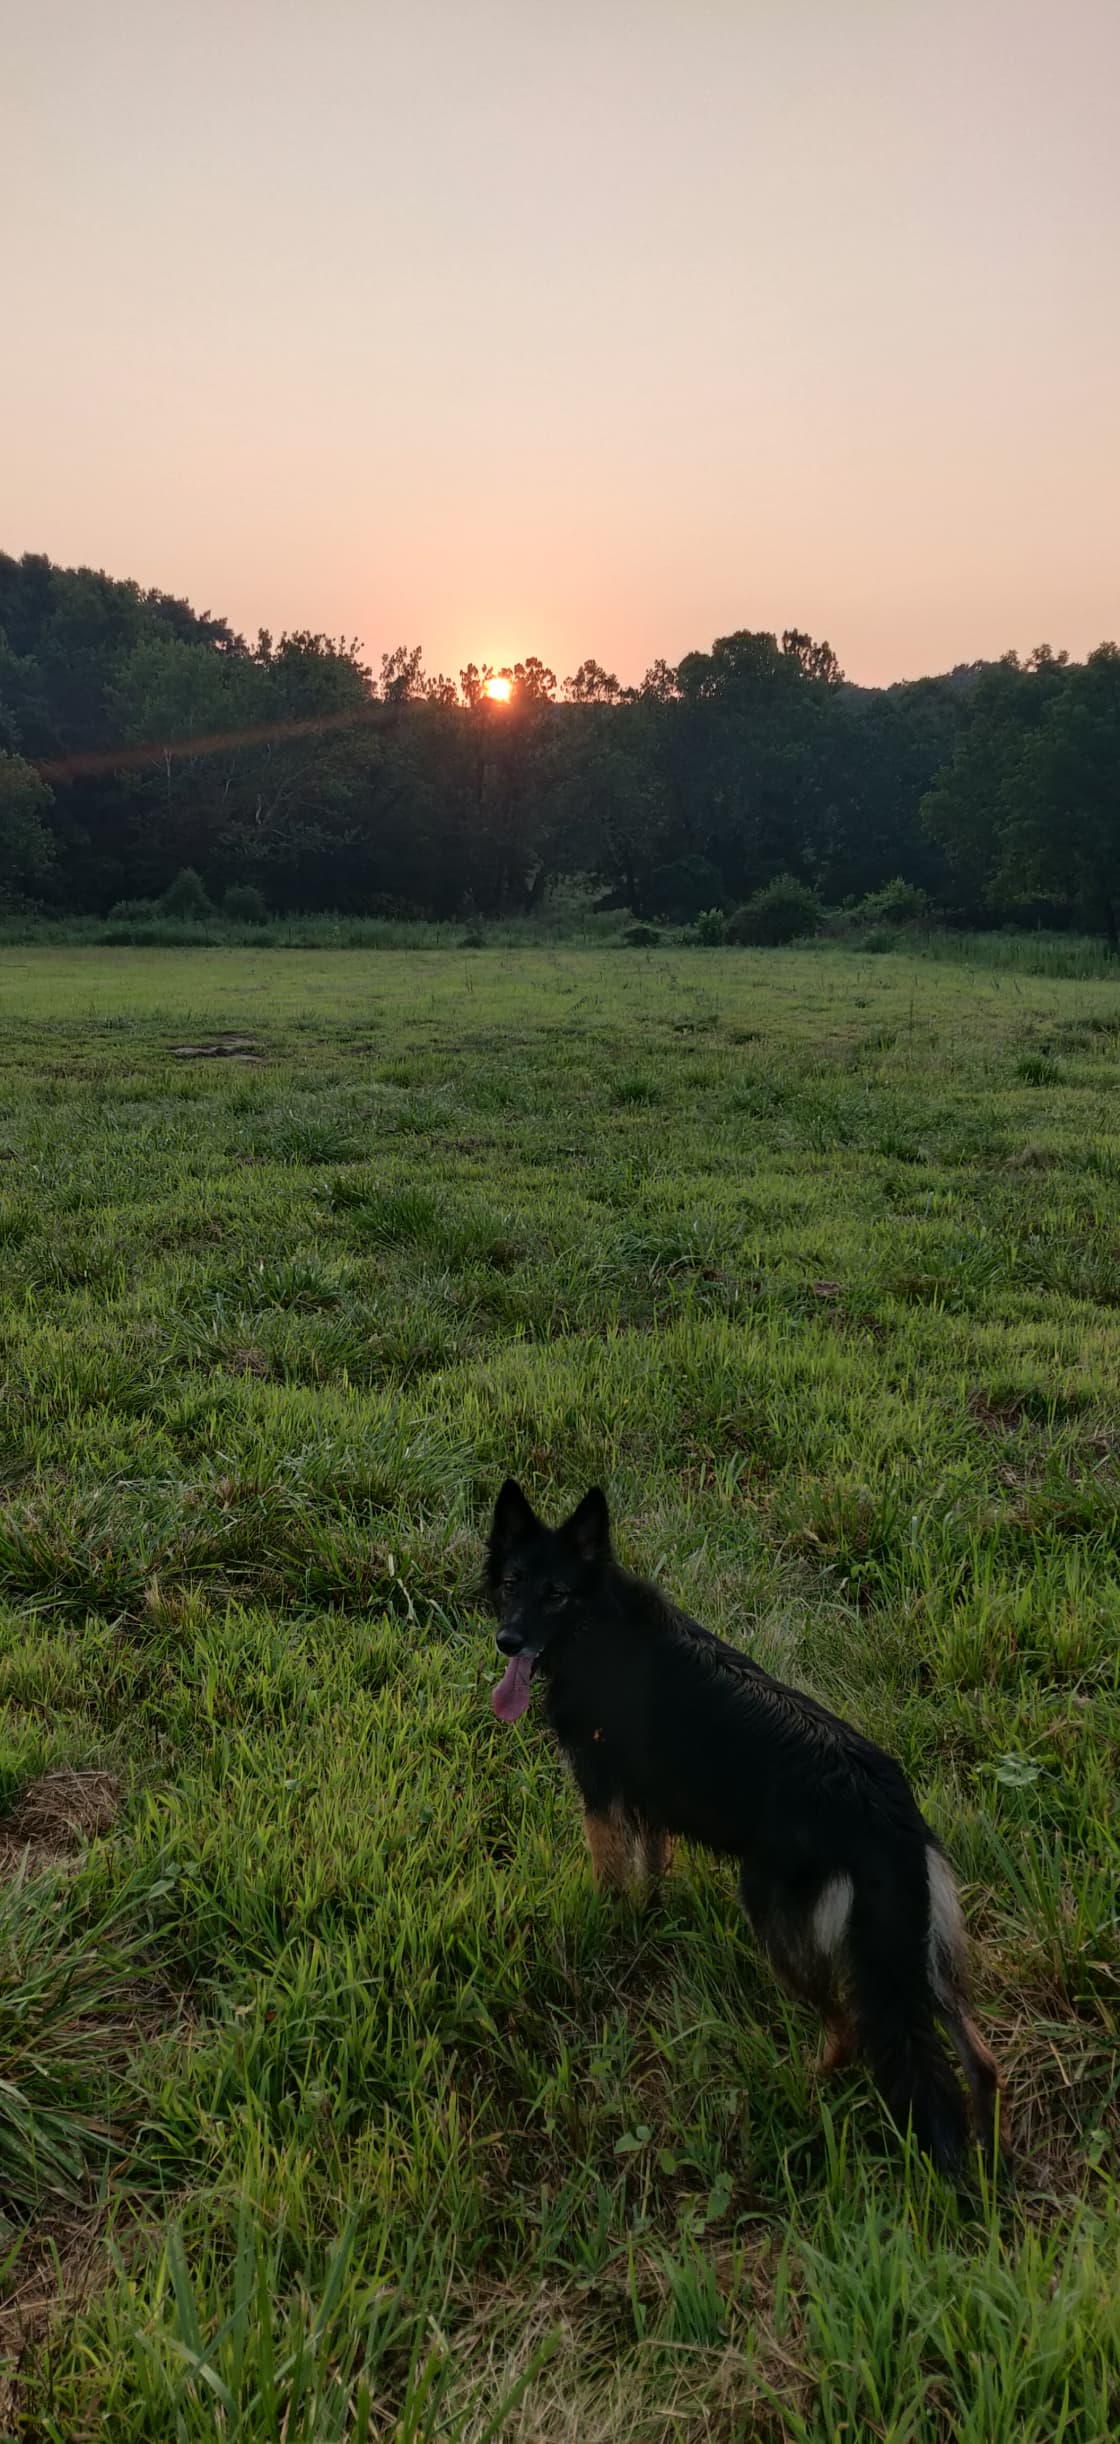 Not a great photo, but my dog loved all the space to live out her farm dog dreams.